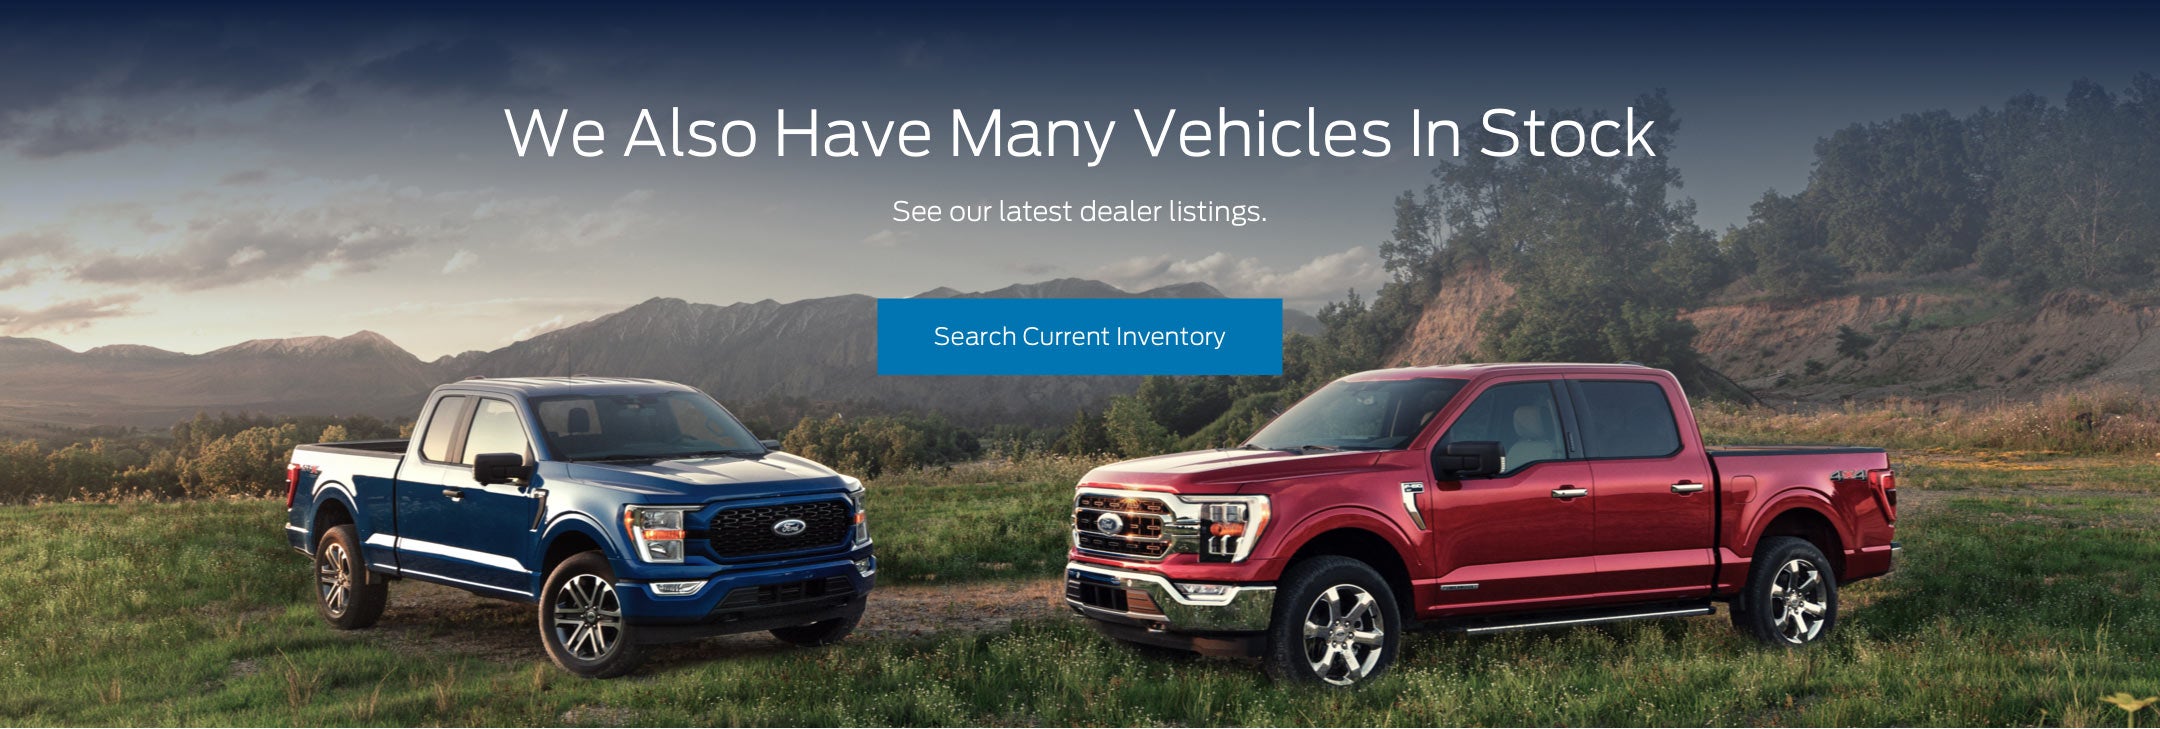 Ford vehicles in stock | Gerald Jones Ford in Augusta GA